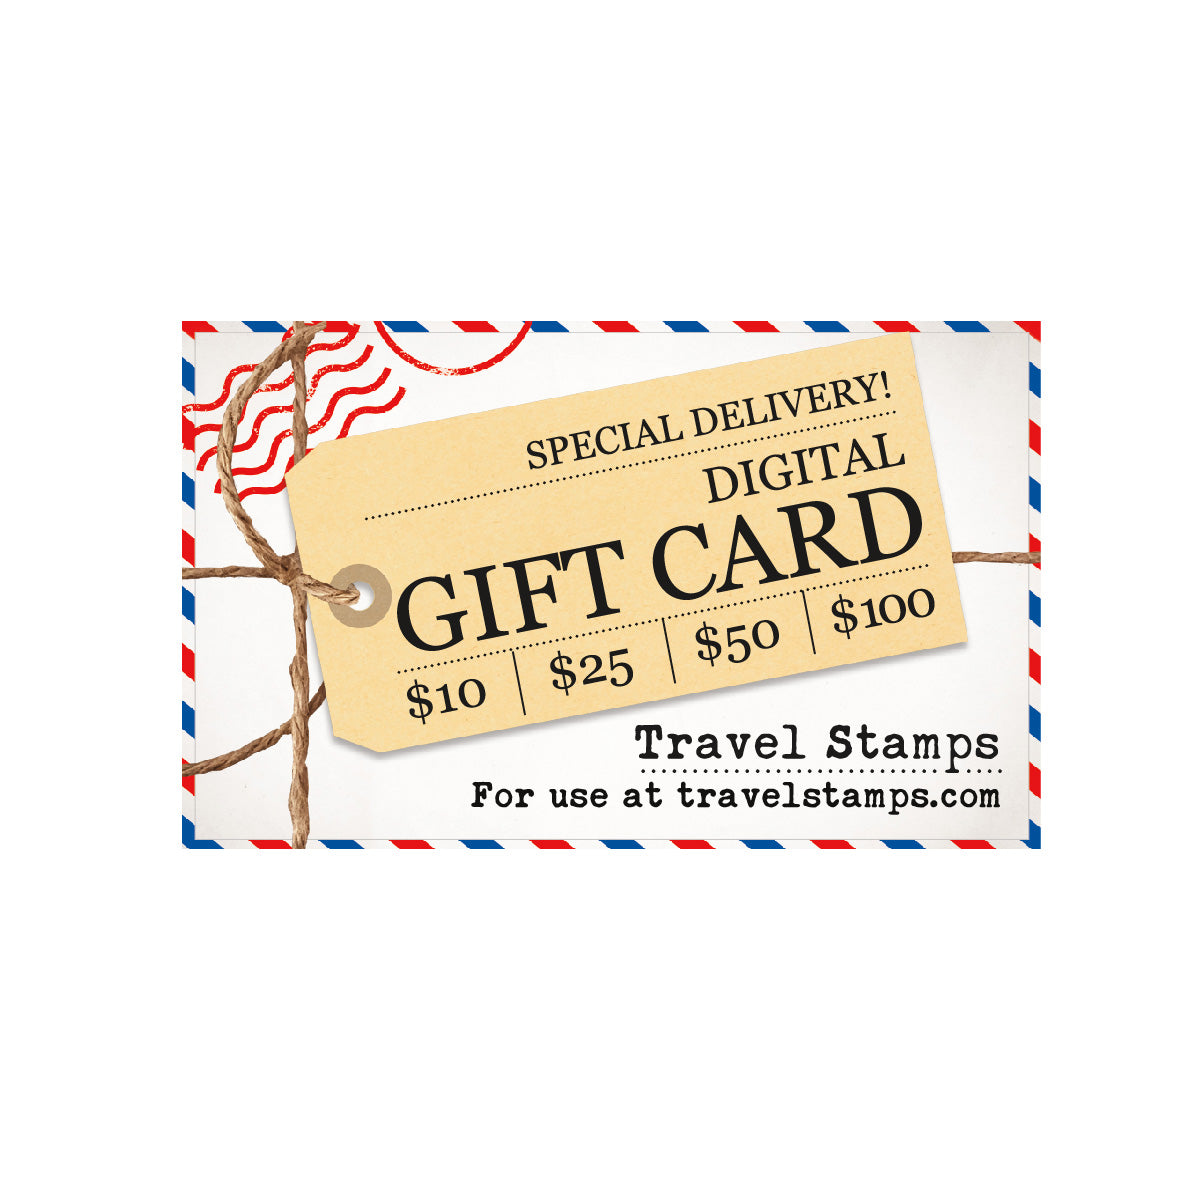 Travel Gift Card